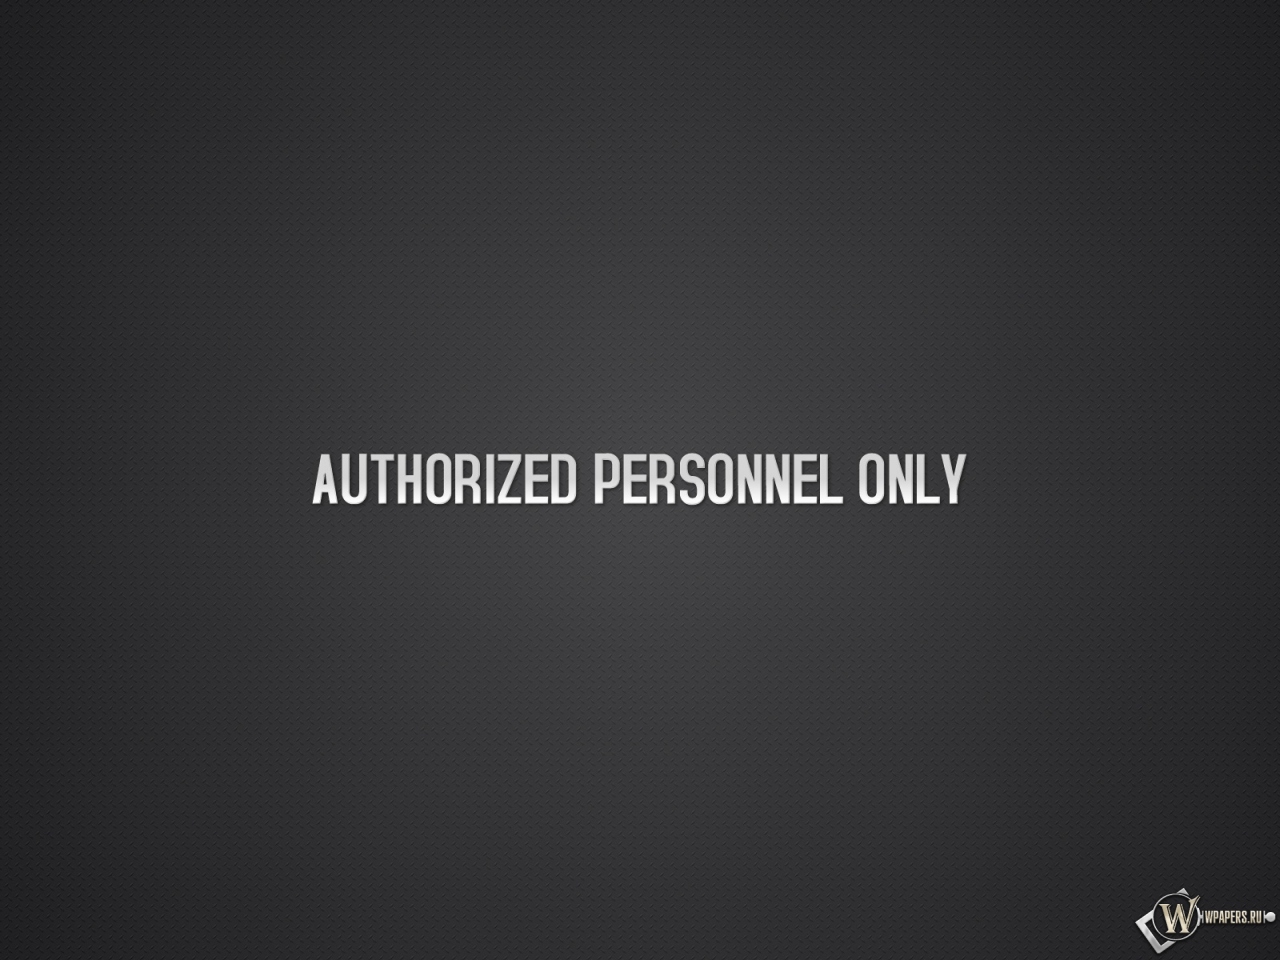 Authorized personnel only 1280x960